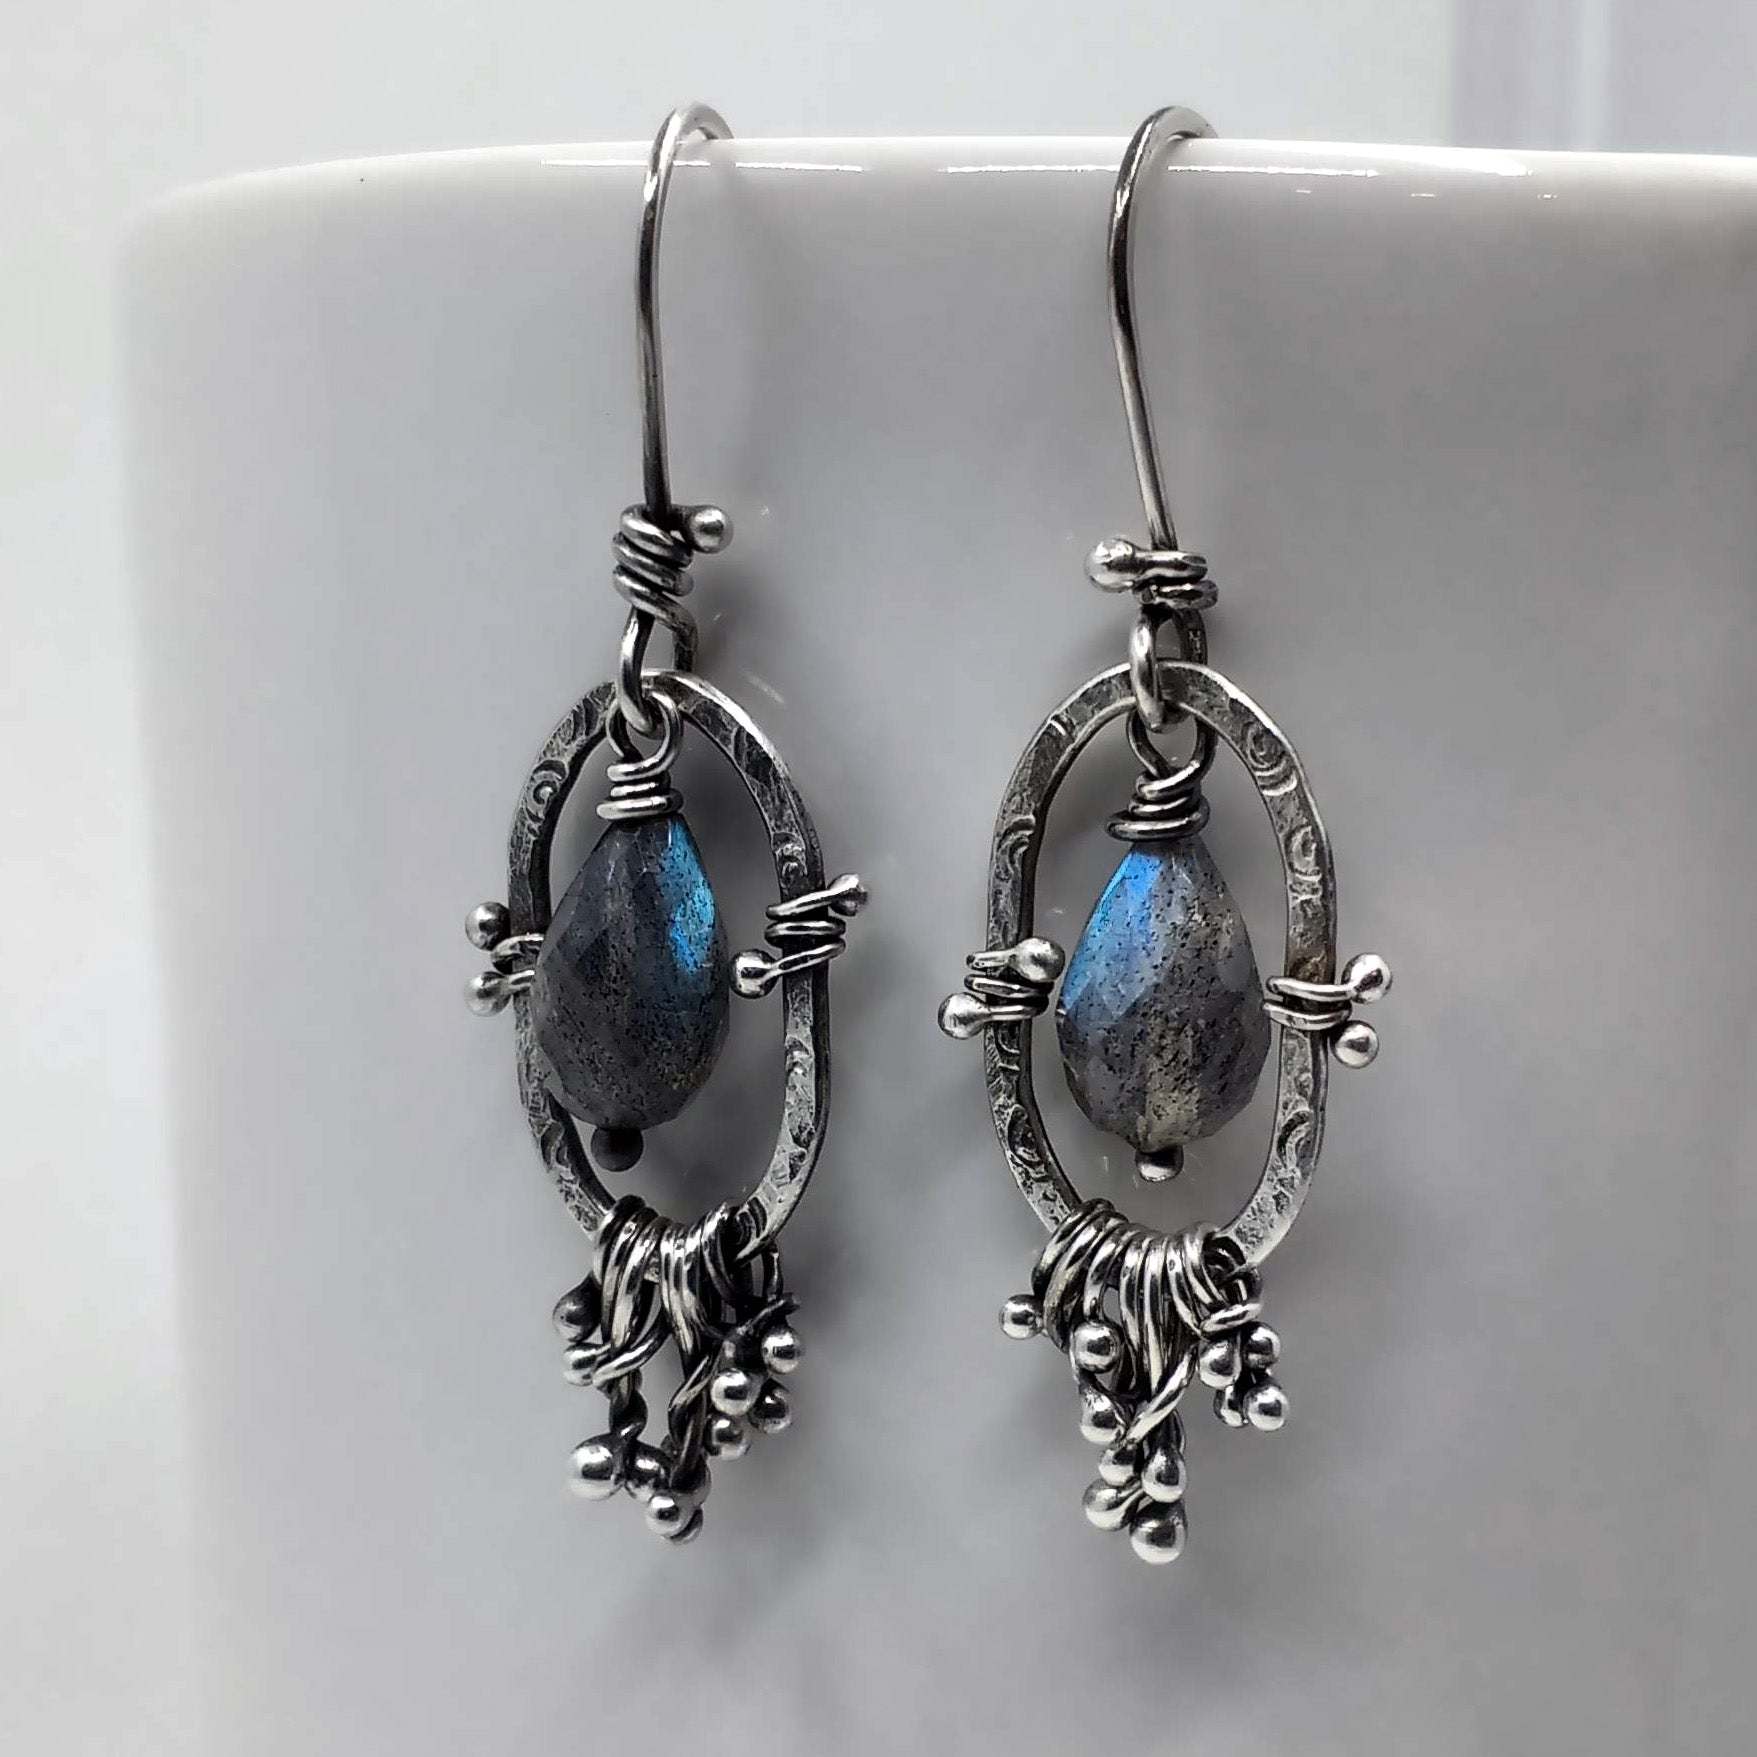 Artisan made sterling silver earrings with Labradorite